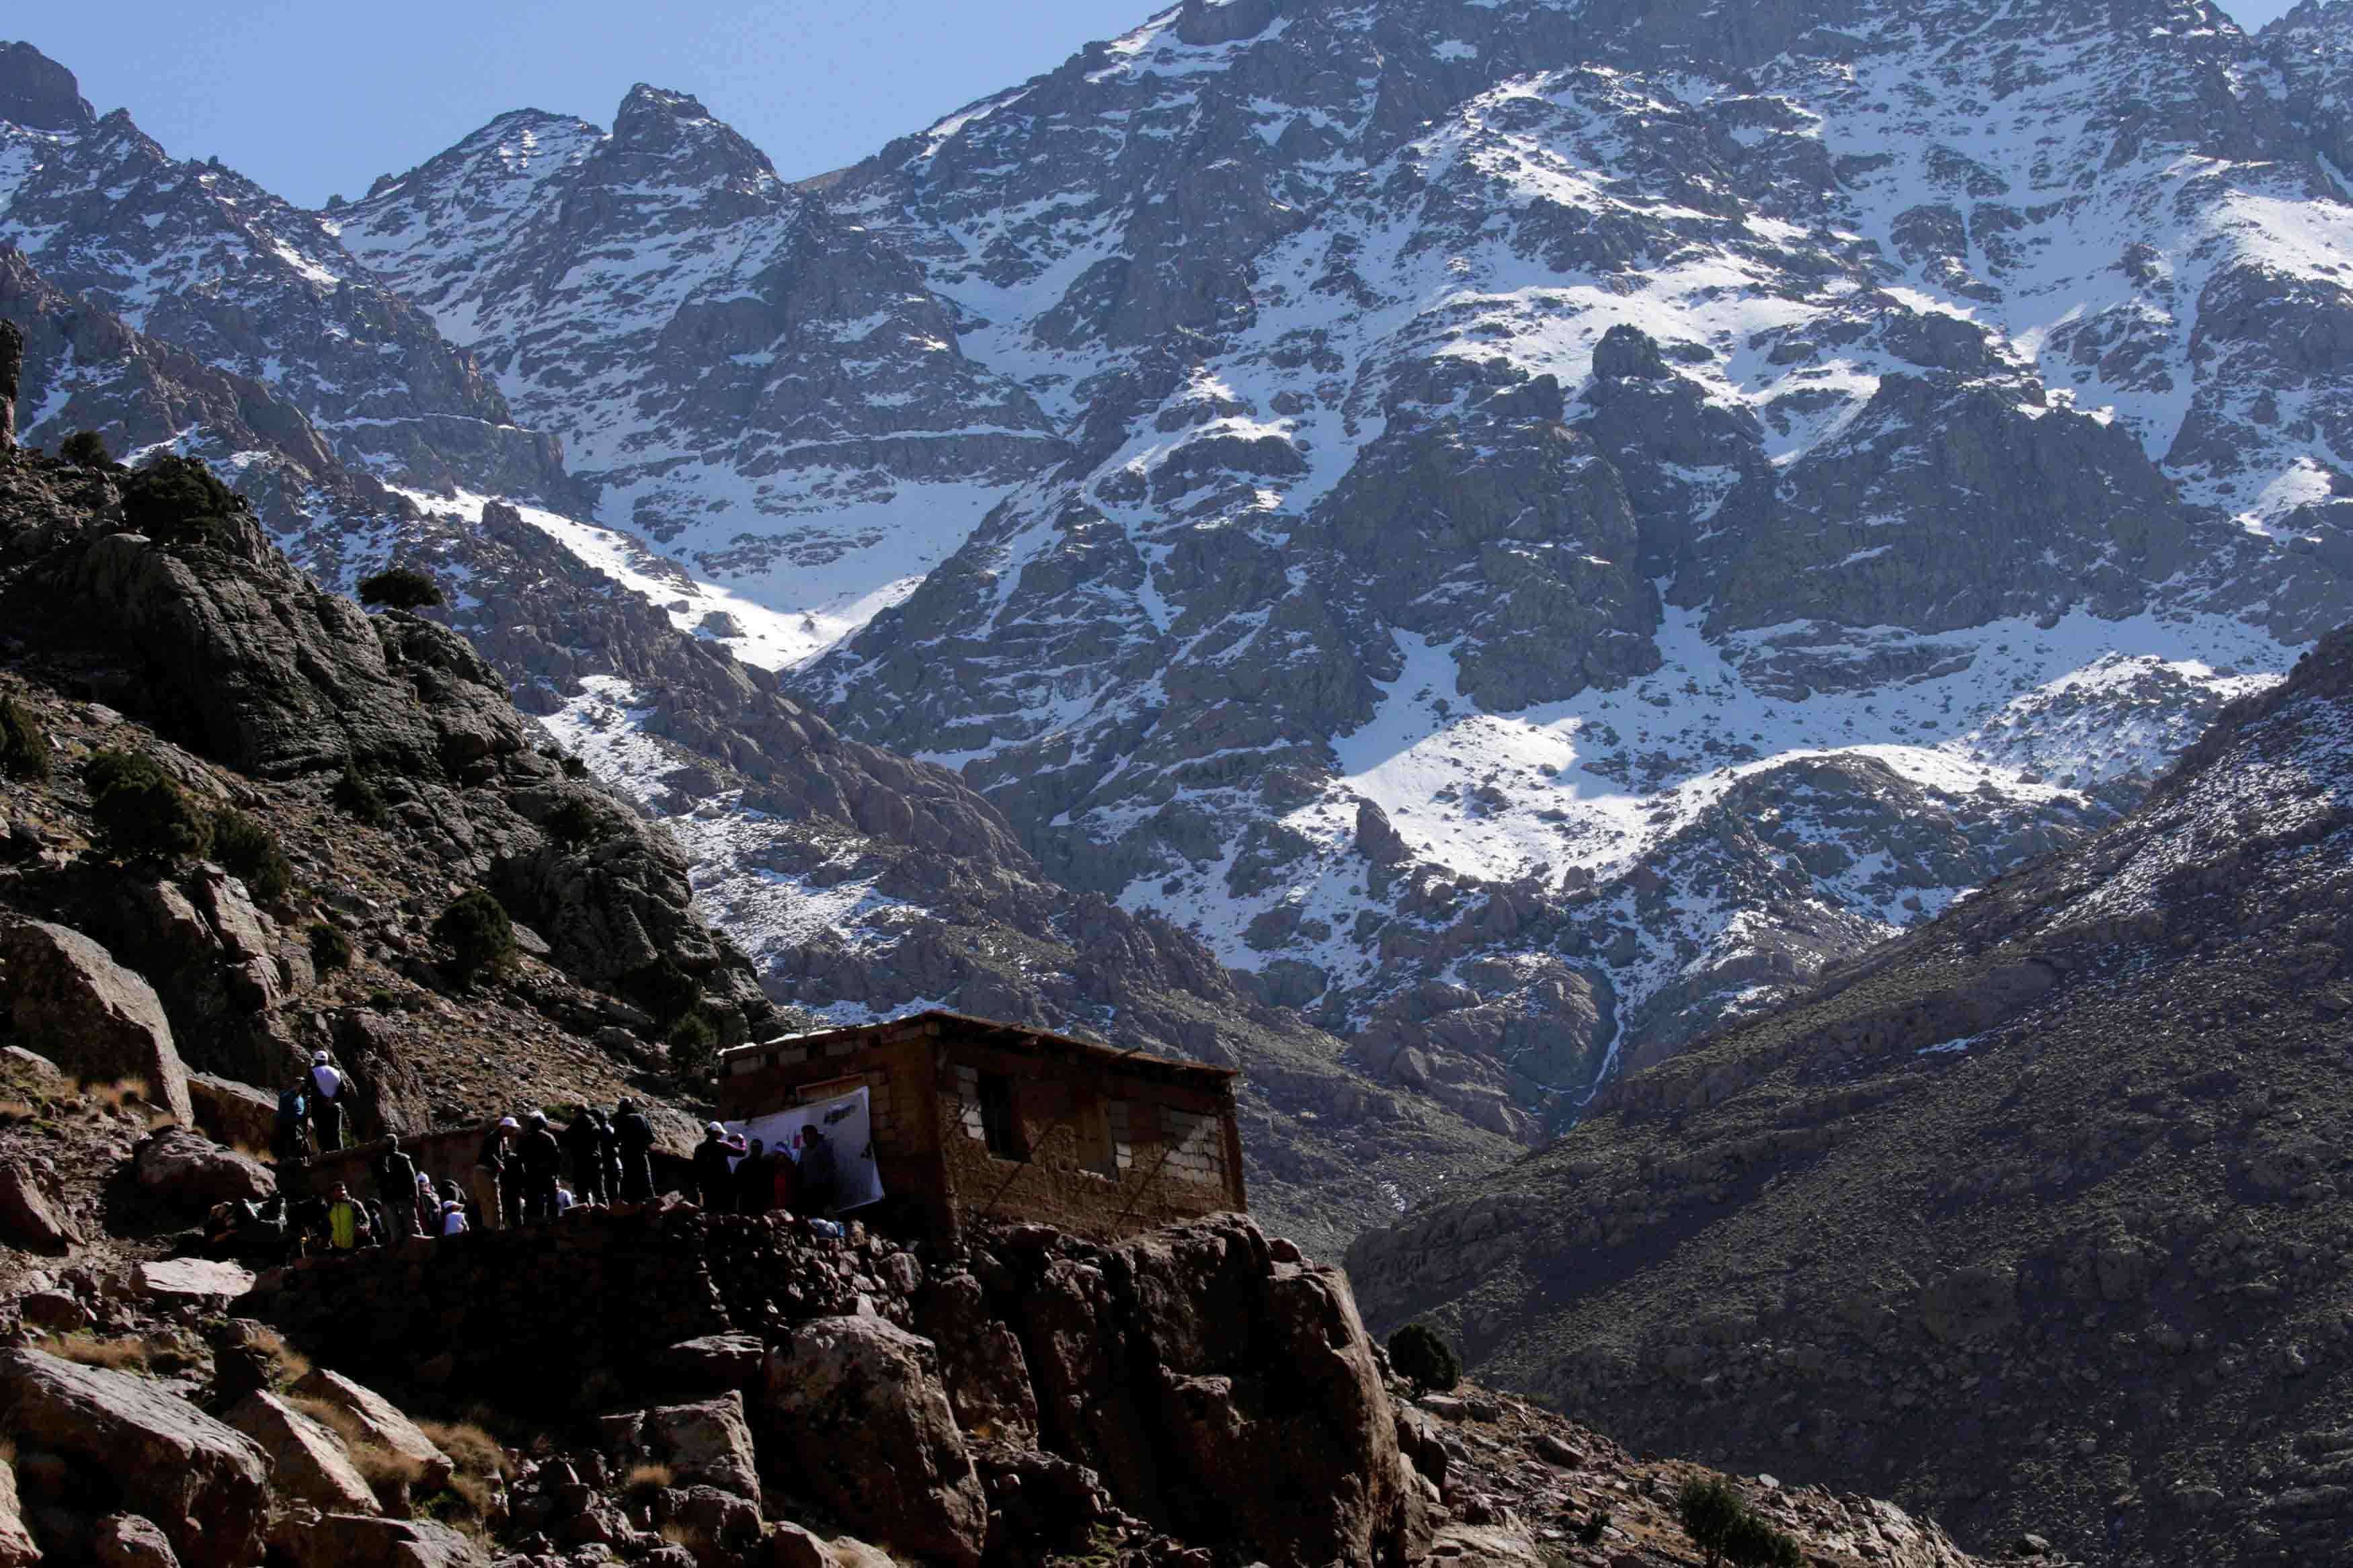 The decapitated bodies of the two victims were found in the High Atlas mountains